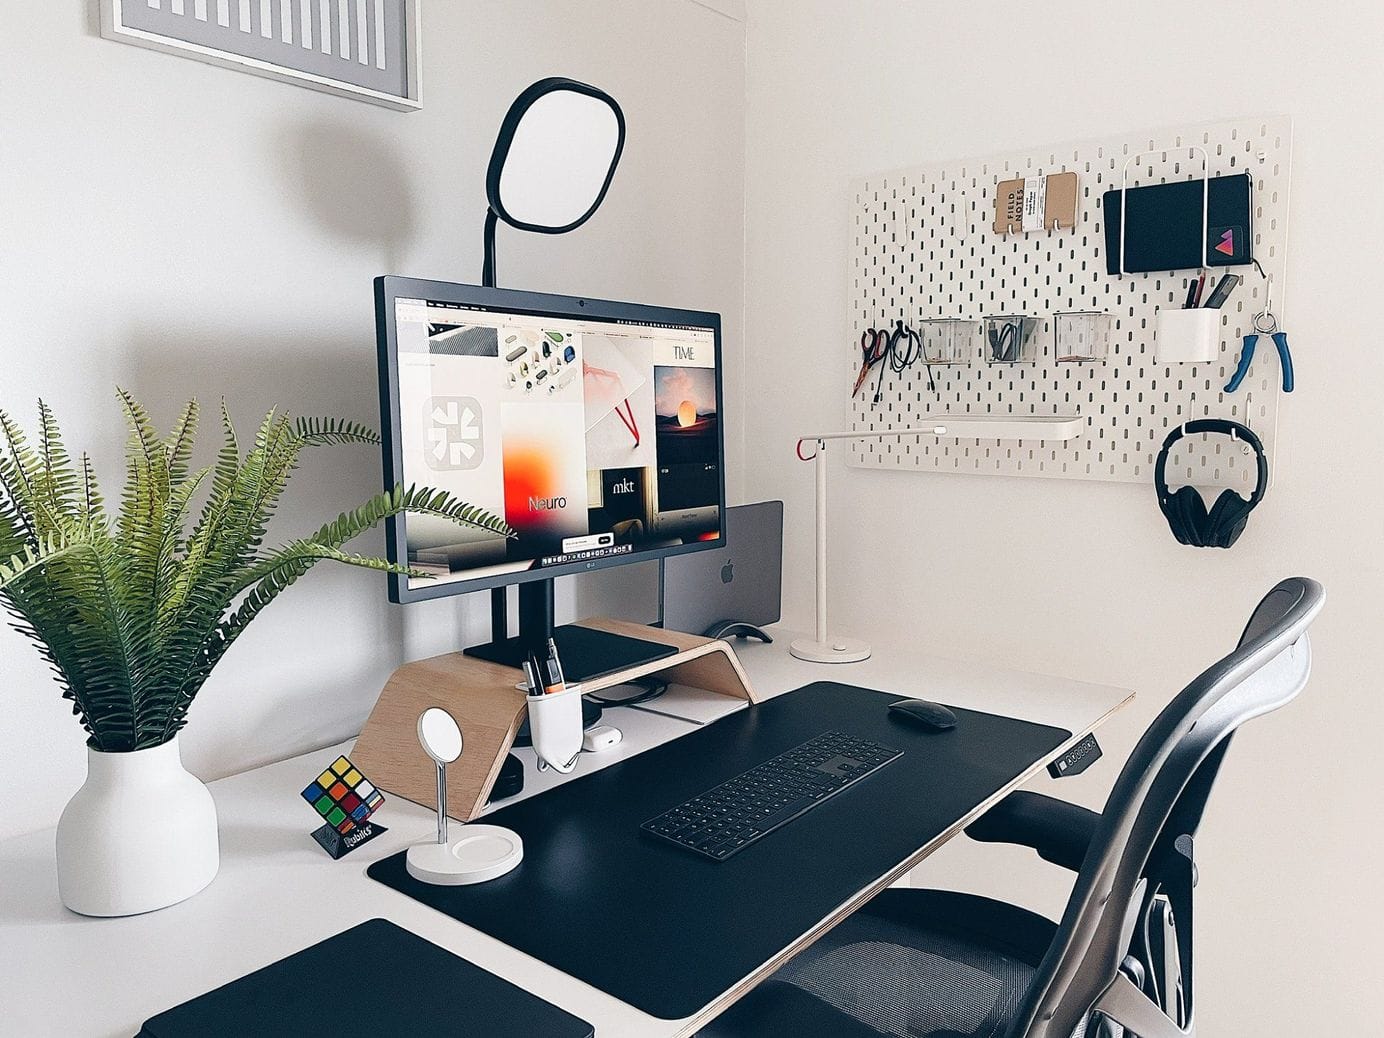 A minimalist desk setup with a monitor on a wooden stand, a potted fern, a pegboard with assorted office supplies, and an ergonomic chair, all neatly organised in a well-lit room